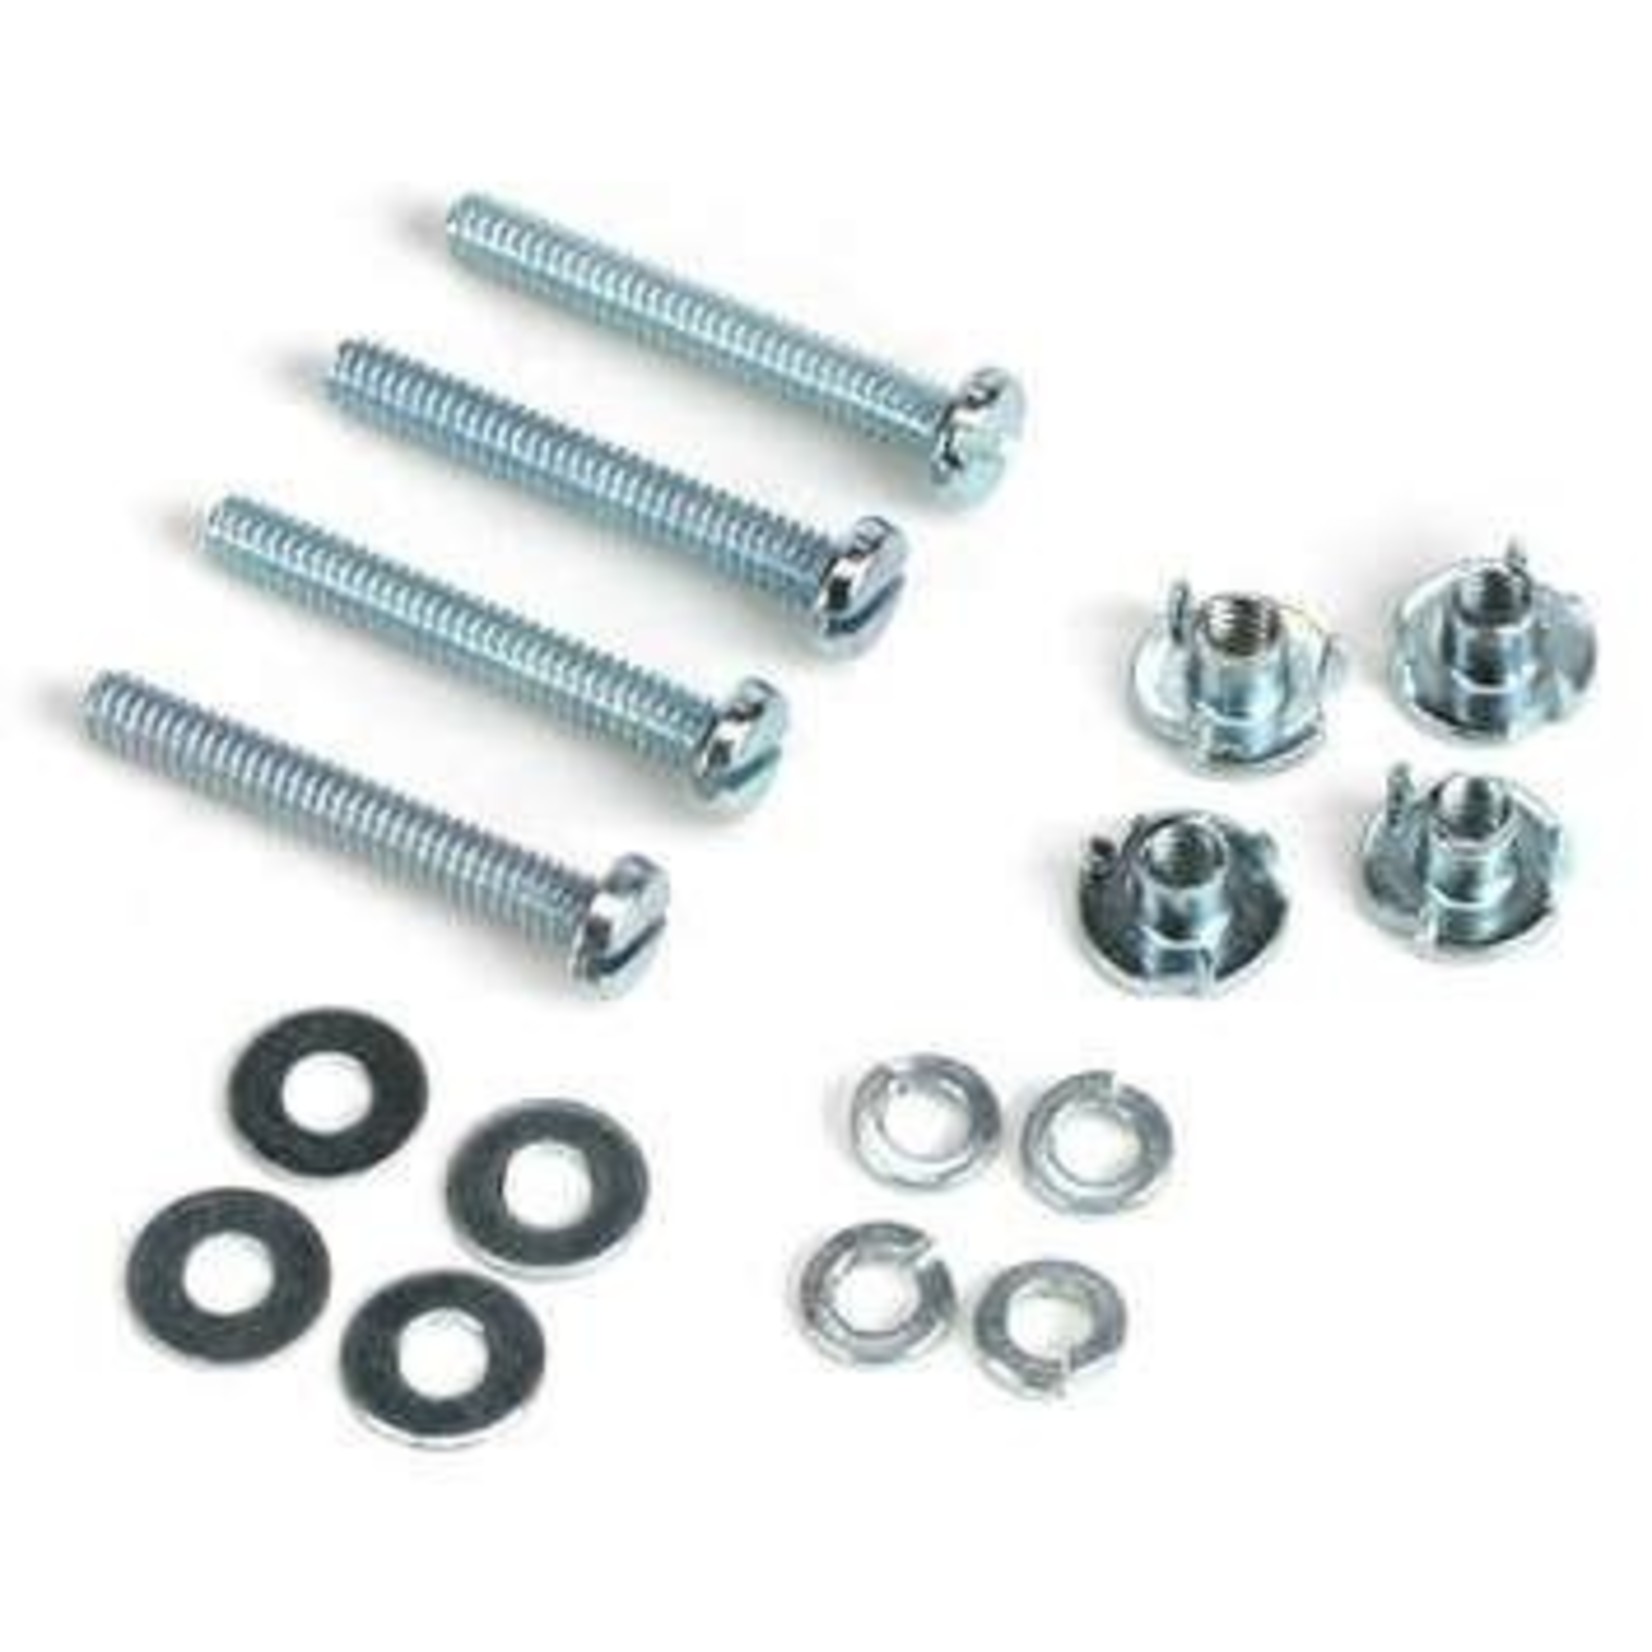 Dubro DUB125 - 2-56x1/2" Mounting Bolts & Blind Nuts